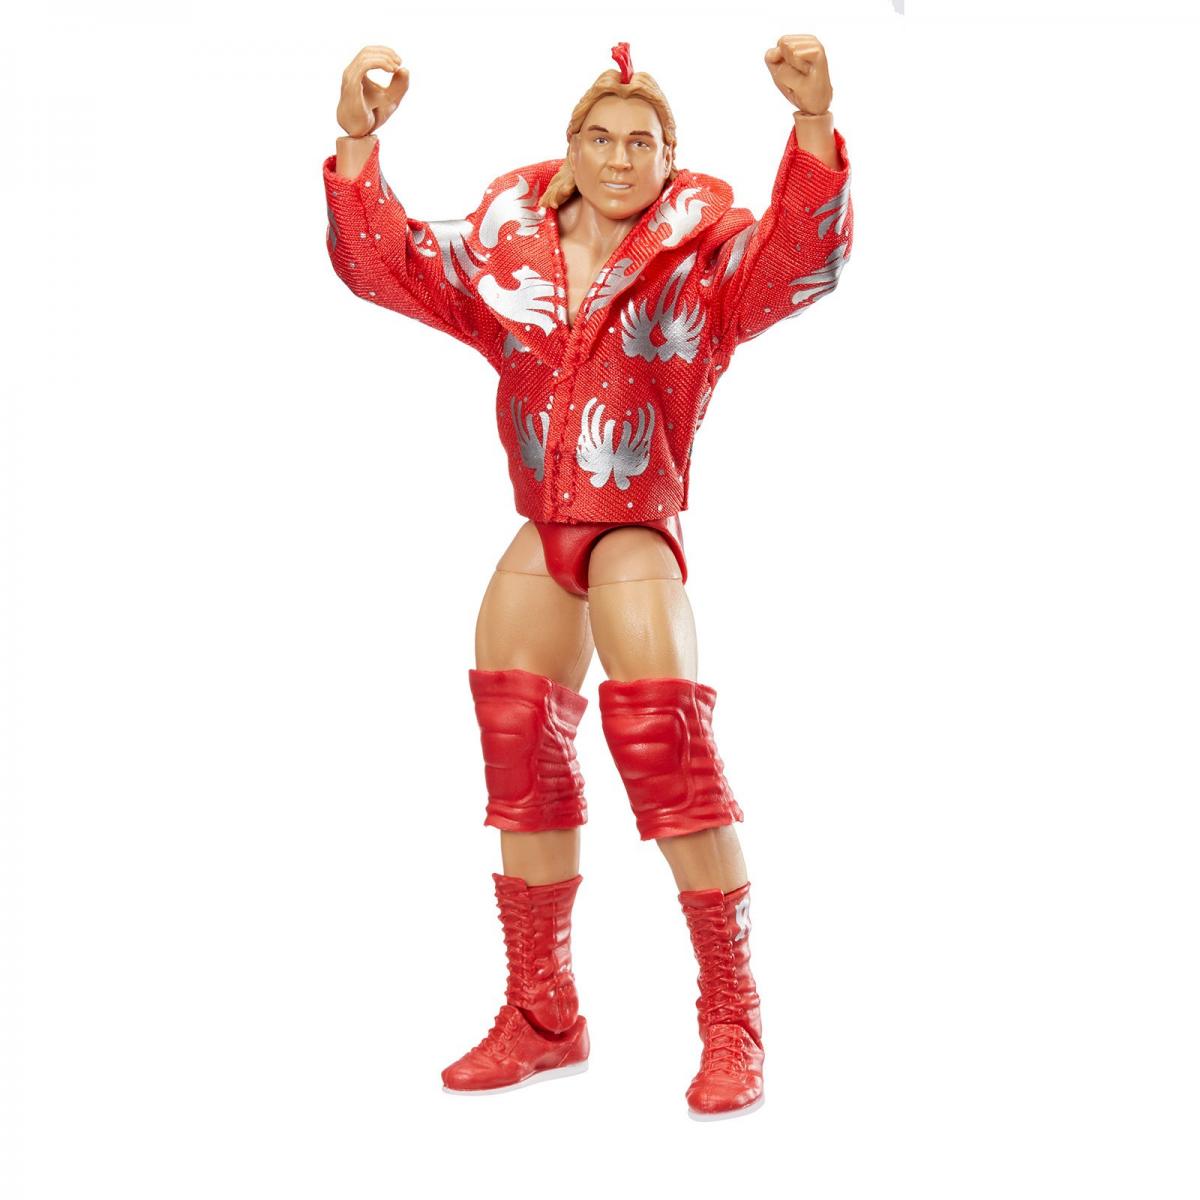 WWE Elite Red Rooster Action Figure, Ringside Brood Exclusive Figure Images (Photos) - Wrestlezone